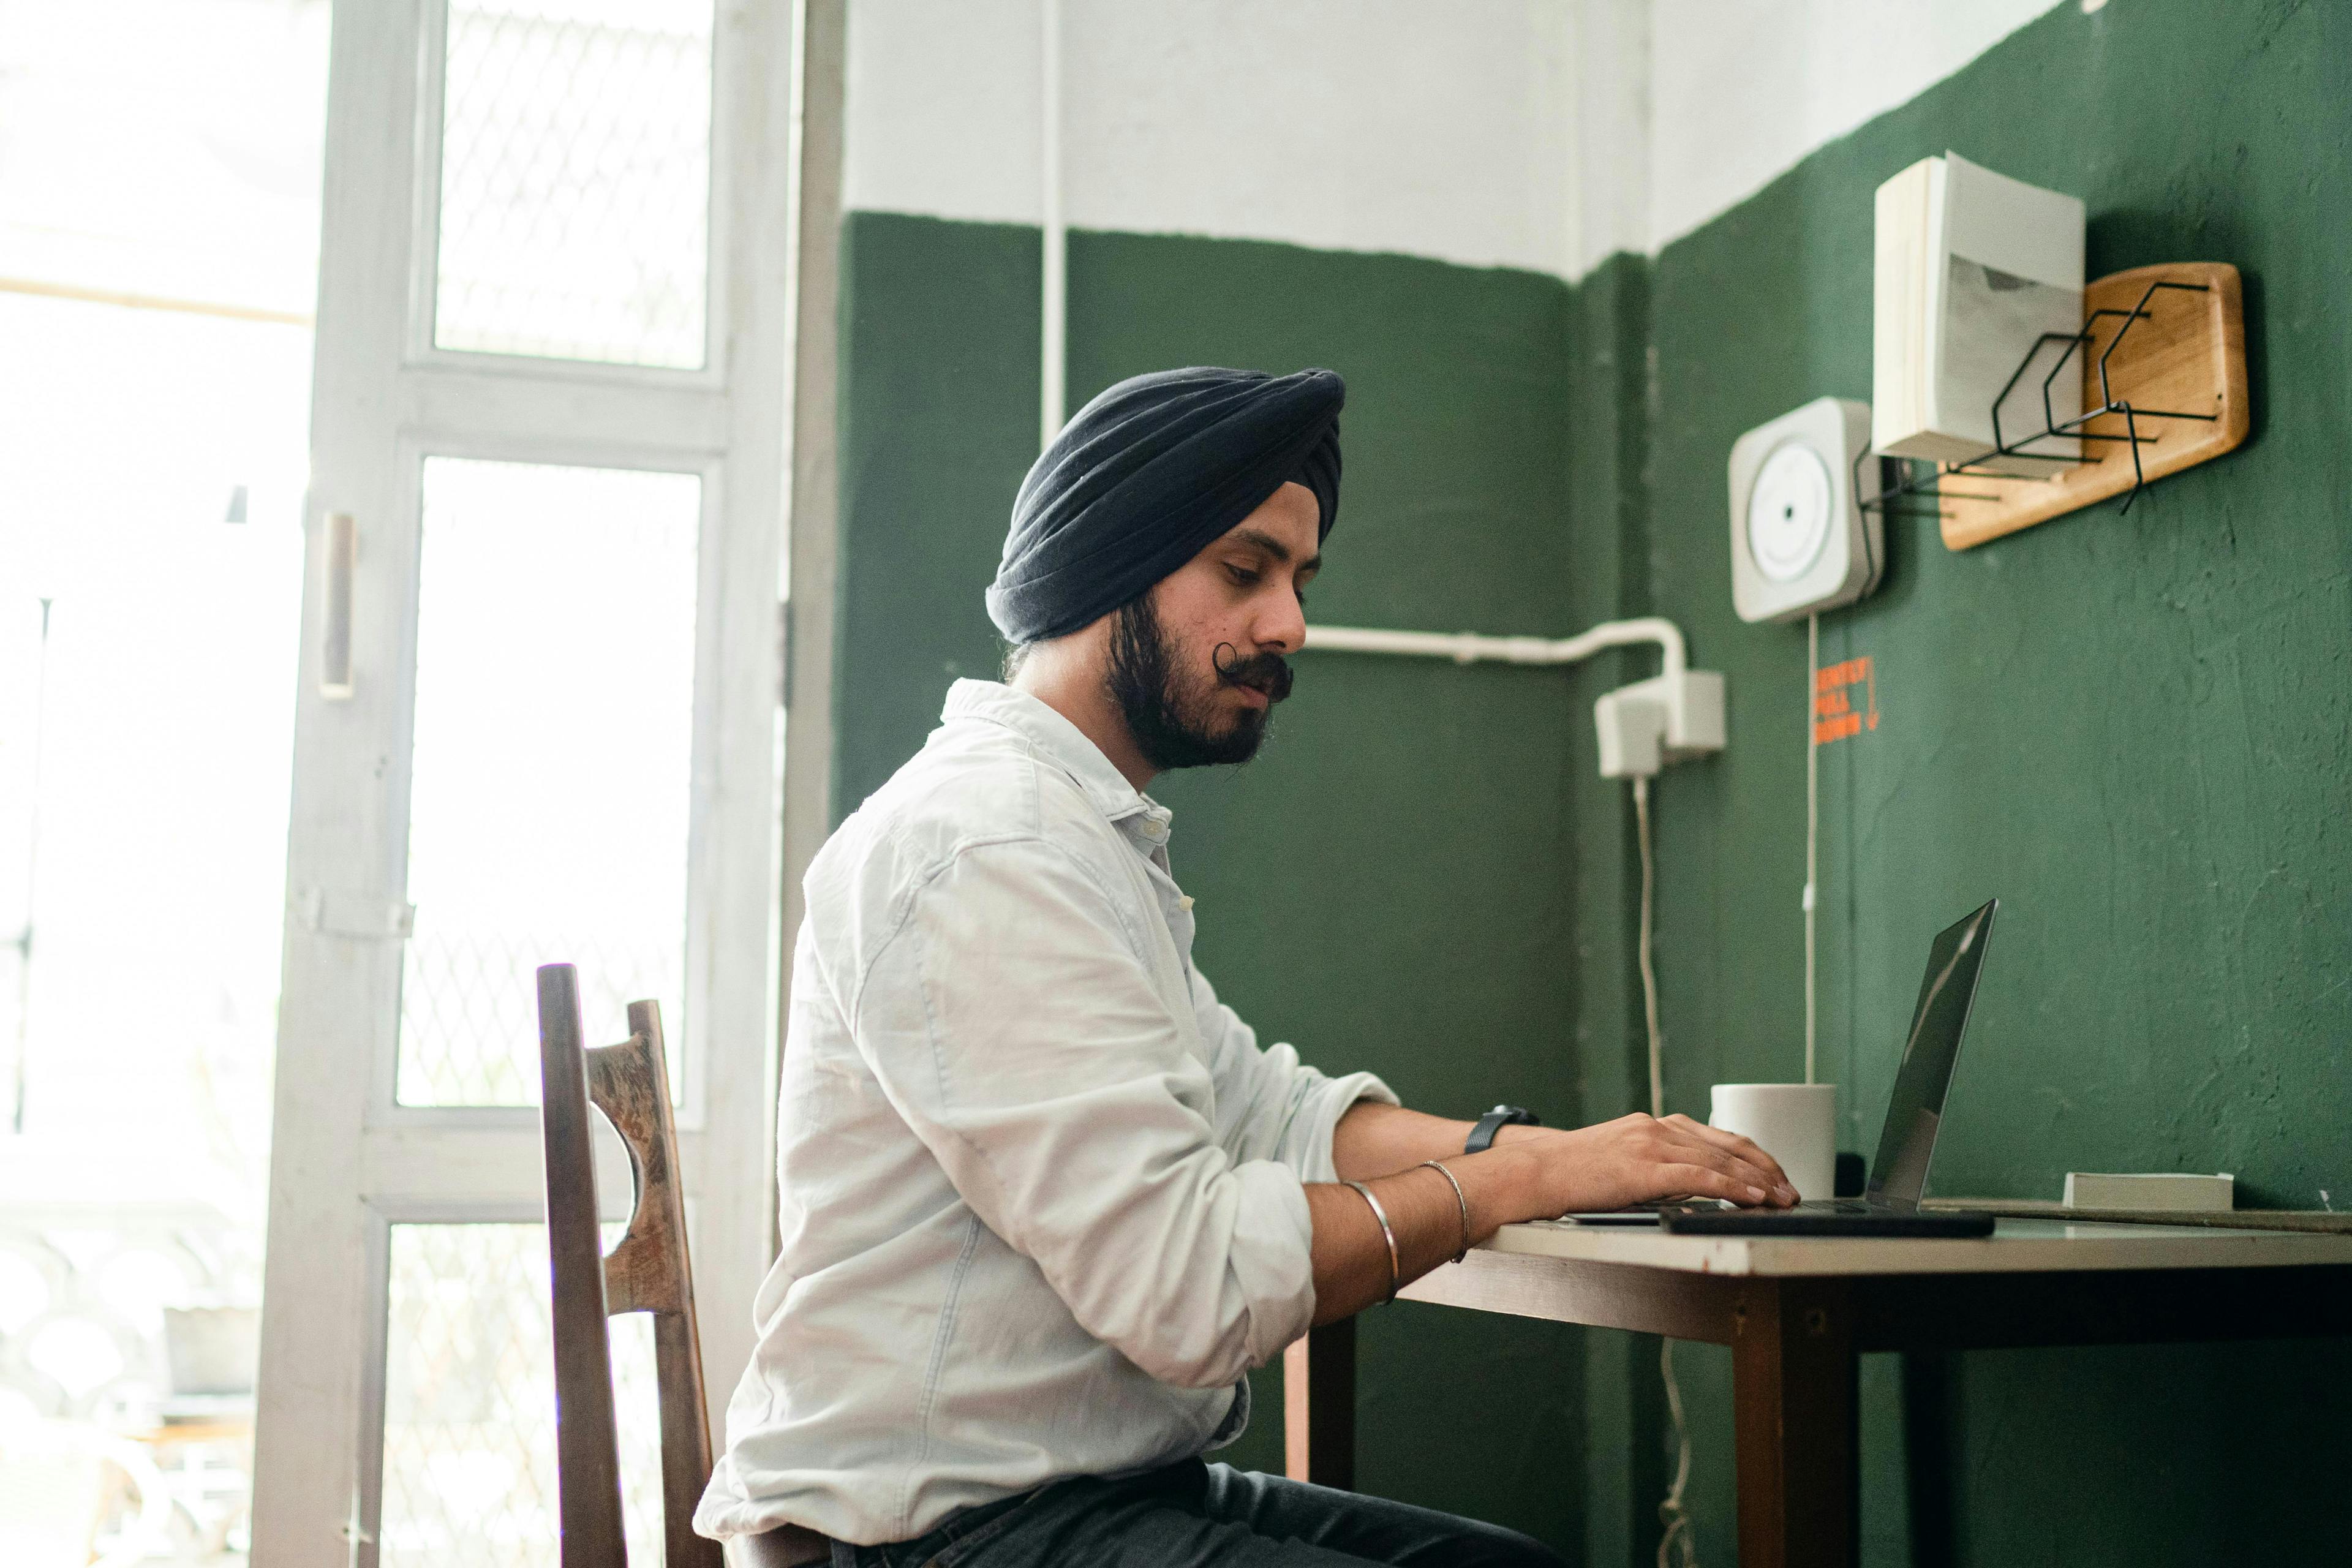 A man wearing a turban working on a laptop at a desk in a green-walled room. He appears focused, likely engaged in tasks related to marketing analytics jobs.